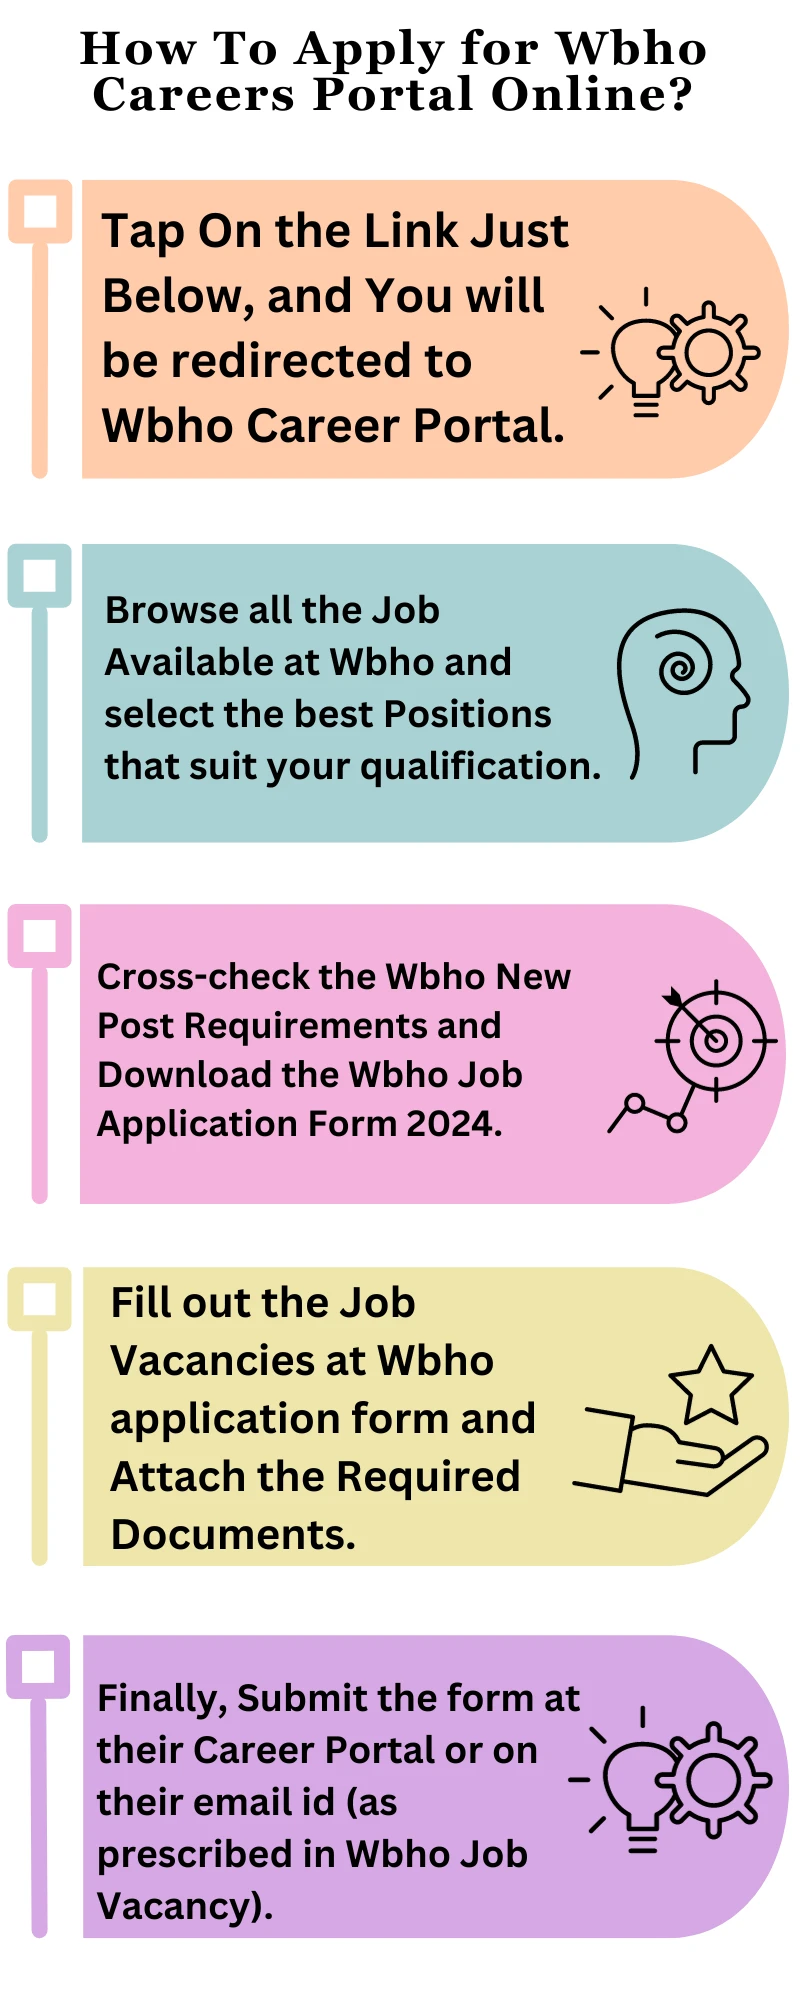 How To Apply for Wbho Careers Portal Online?